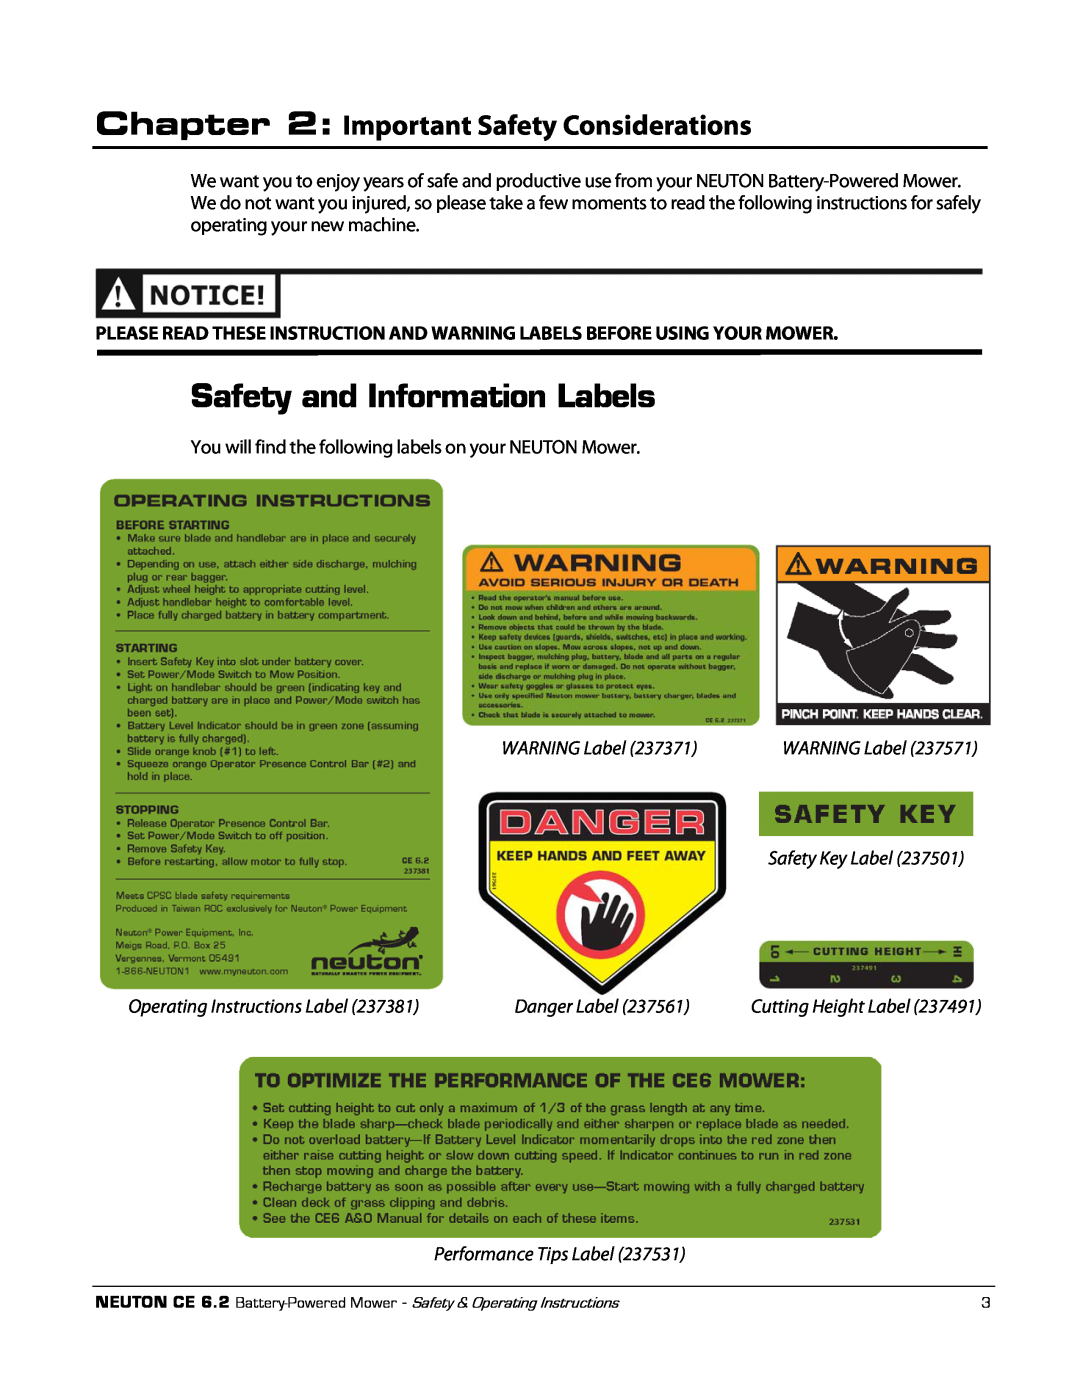 Neuton CE 6.2 manual Safety and Information Labels, Important Safety Considerations, WARNING Label, Safety Key Label 